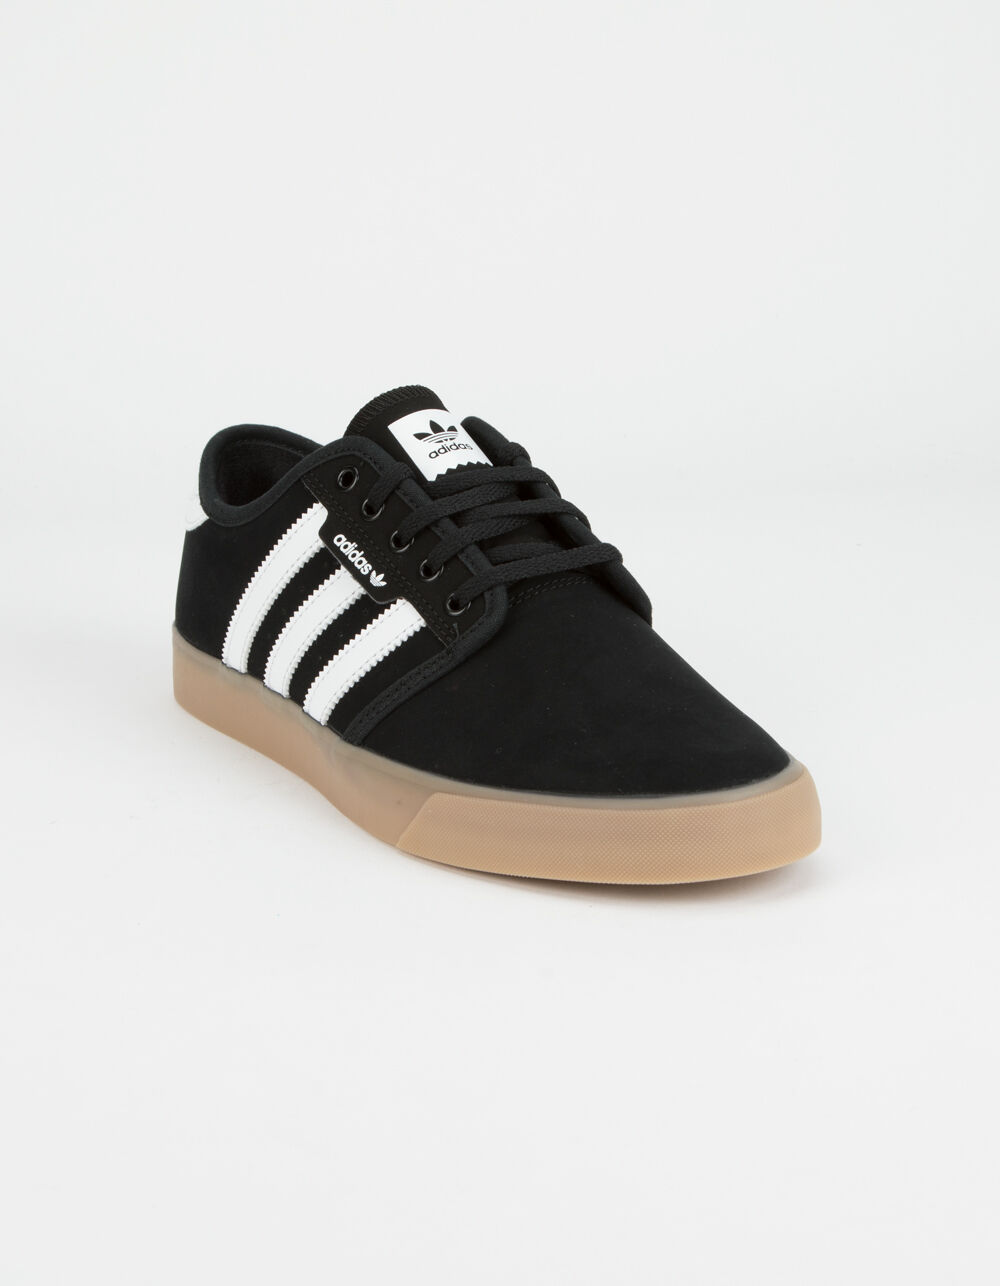 ADIDAS Seeley Shoes - BLACK | Tillys